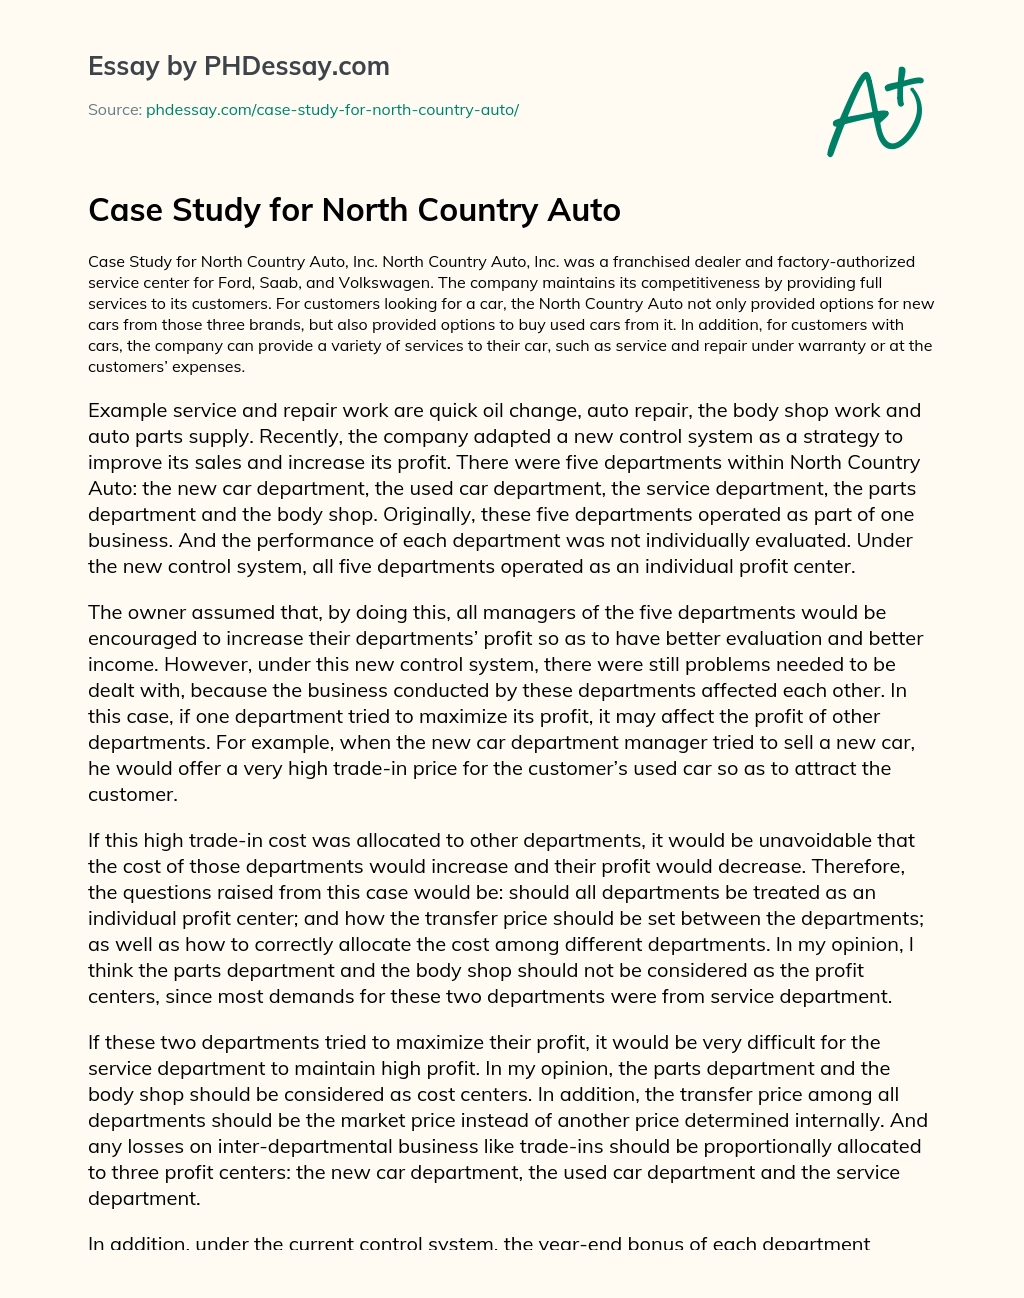 Case Study for North Country Auto essay